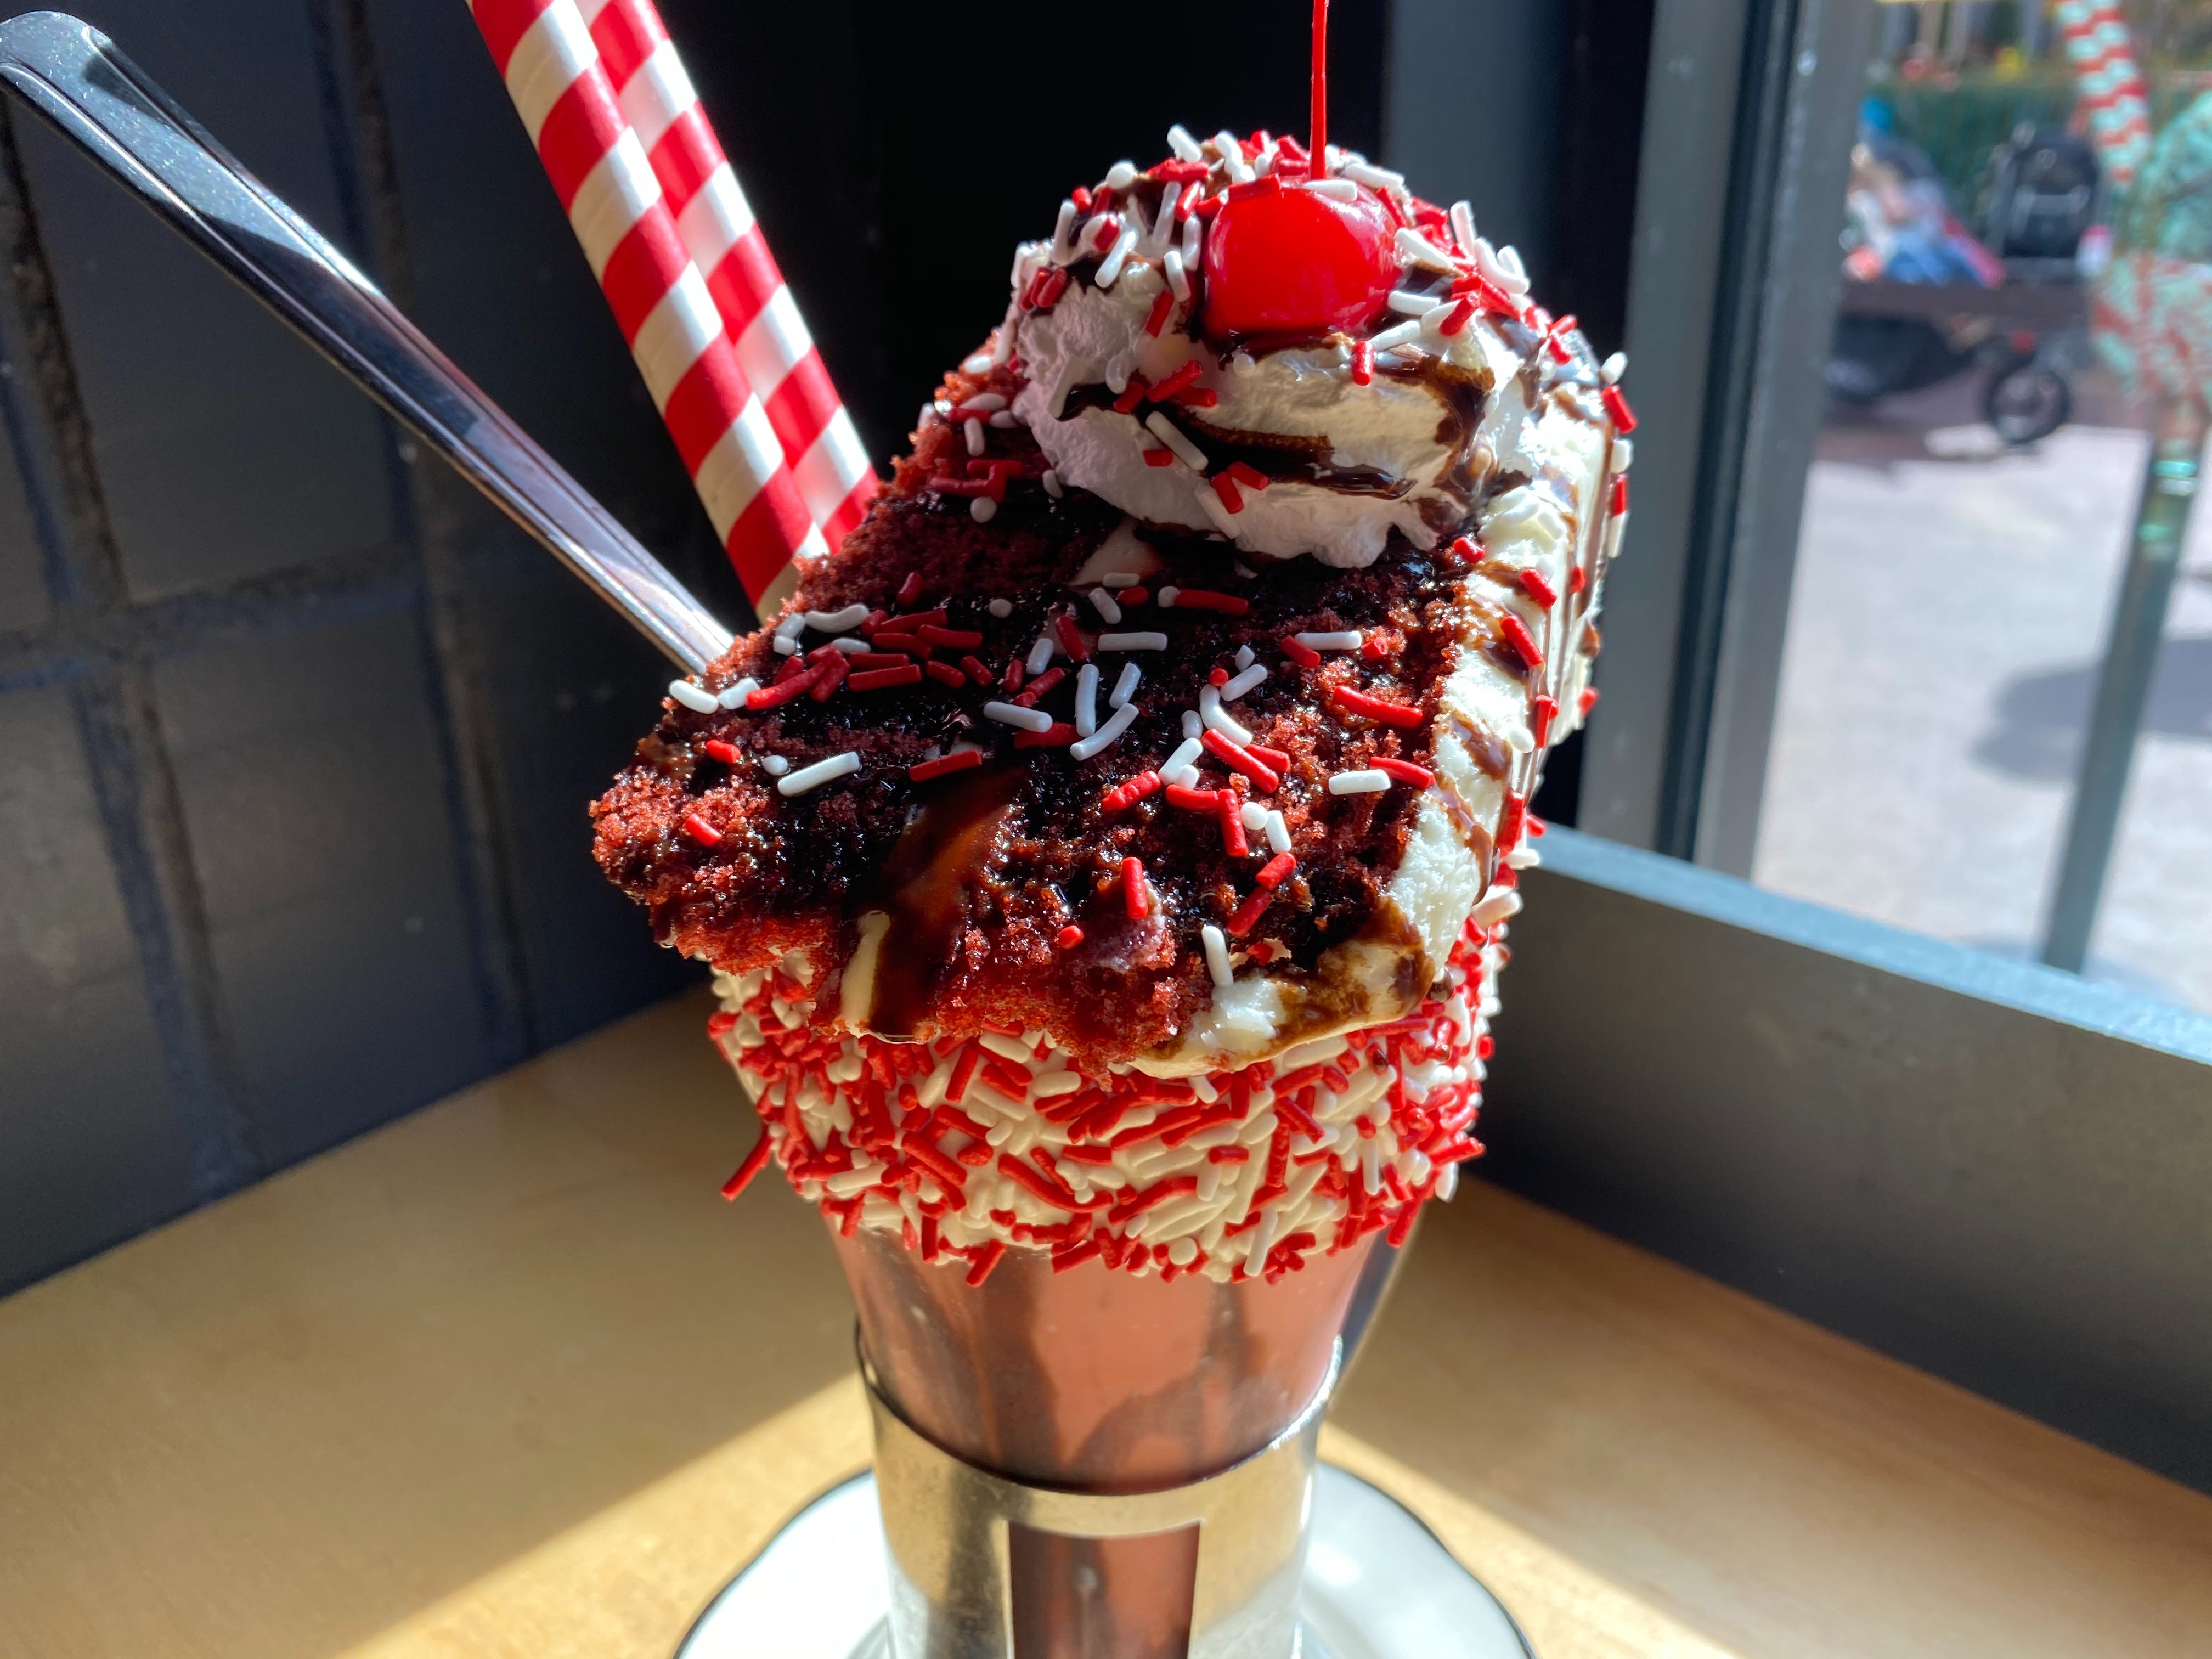 We tasted and rated every Crazy shake on the Black Tap menu